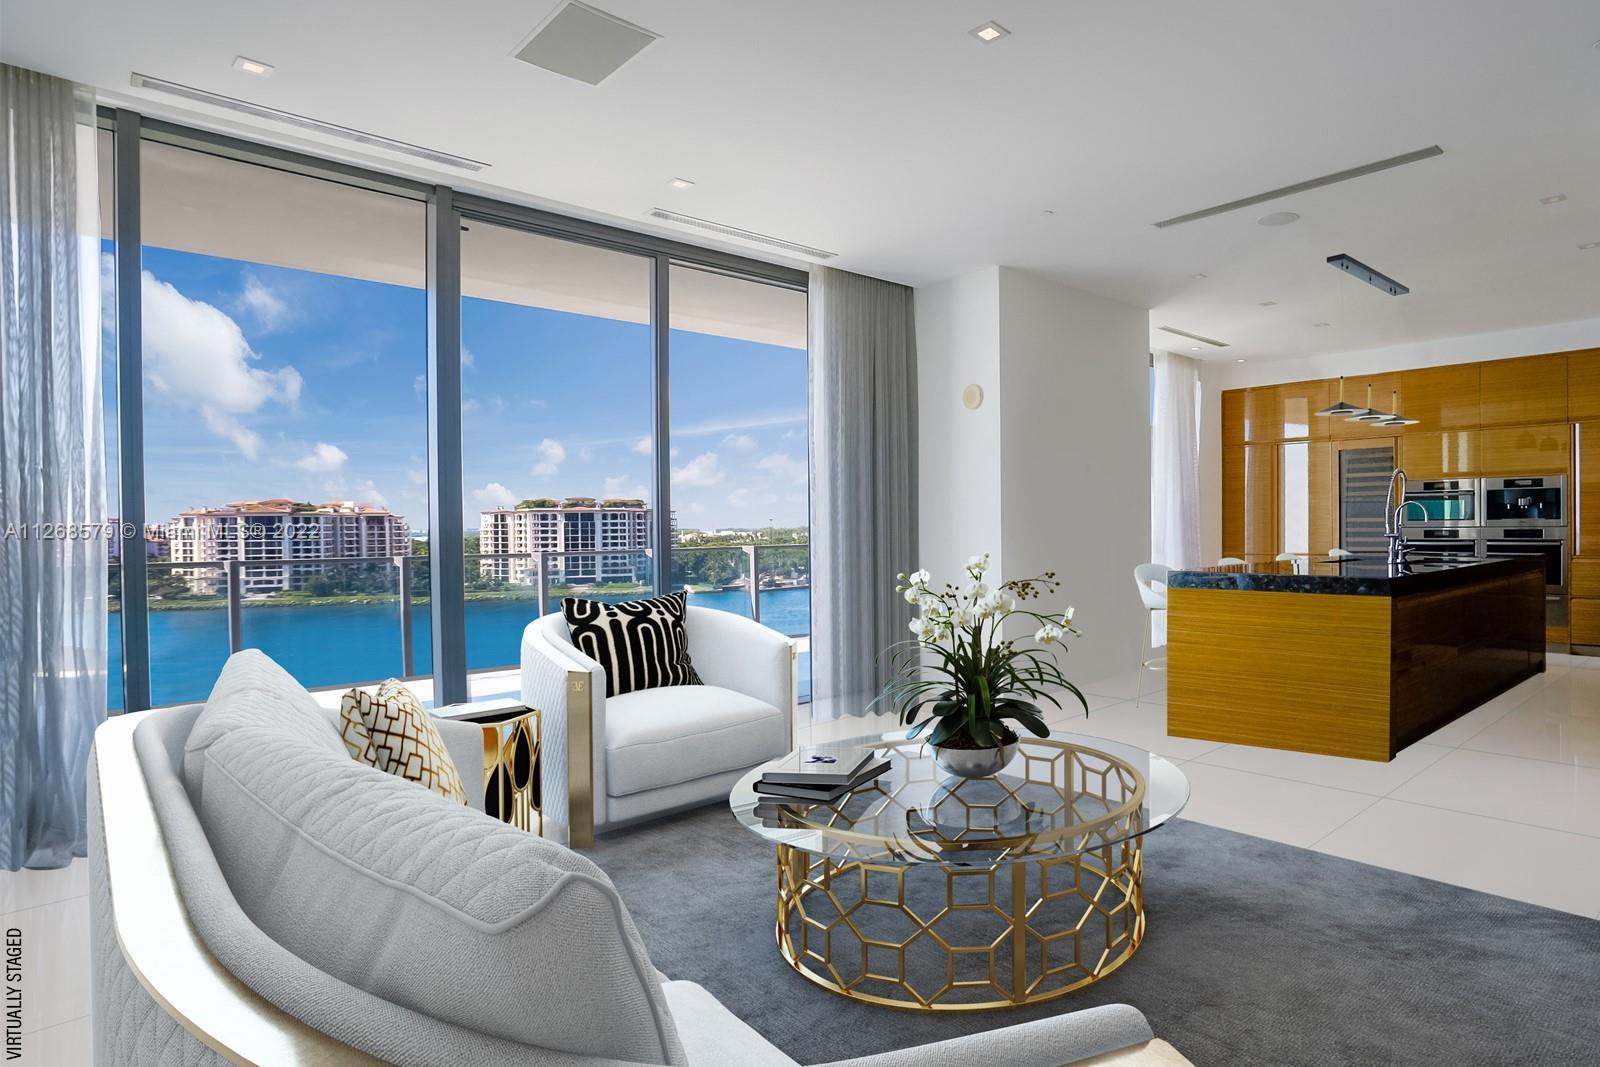 One of South Beach’s most iconic buildings, Apogee offers exquisite residences, a superb amenity dec